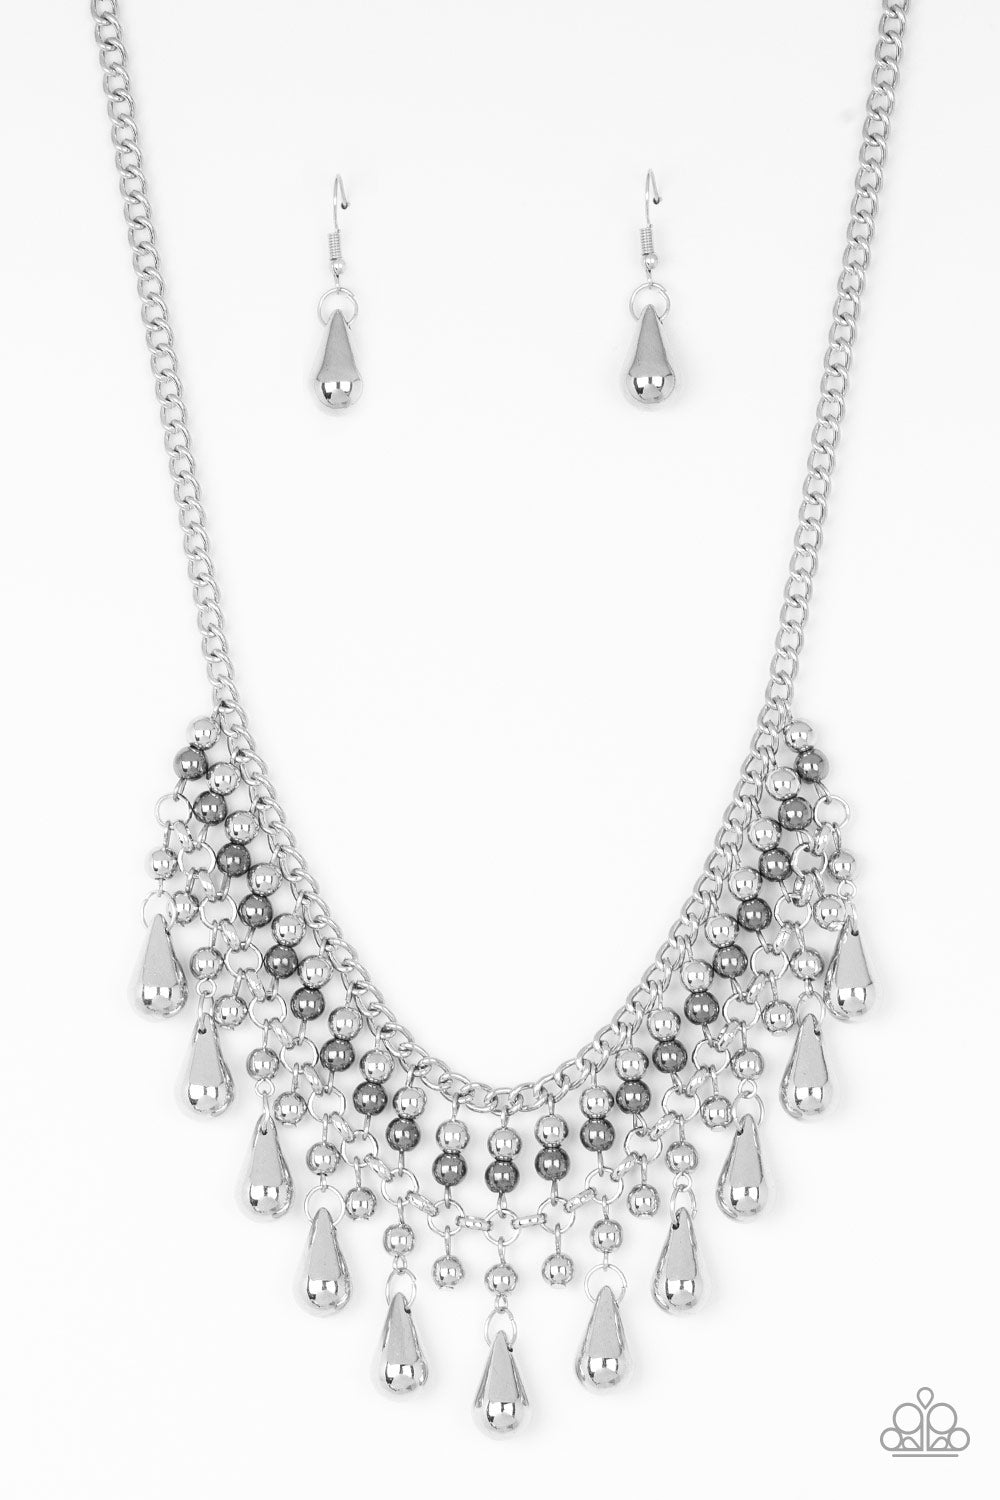 Paparazzi Accessories  - Don't Forget To BOSS! #N231 Peg - Silver  Necklace